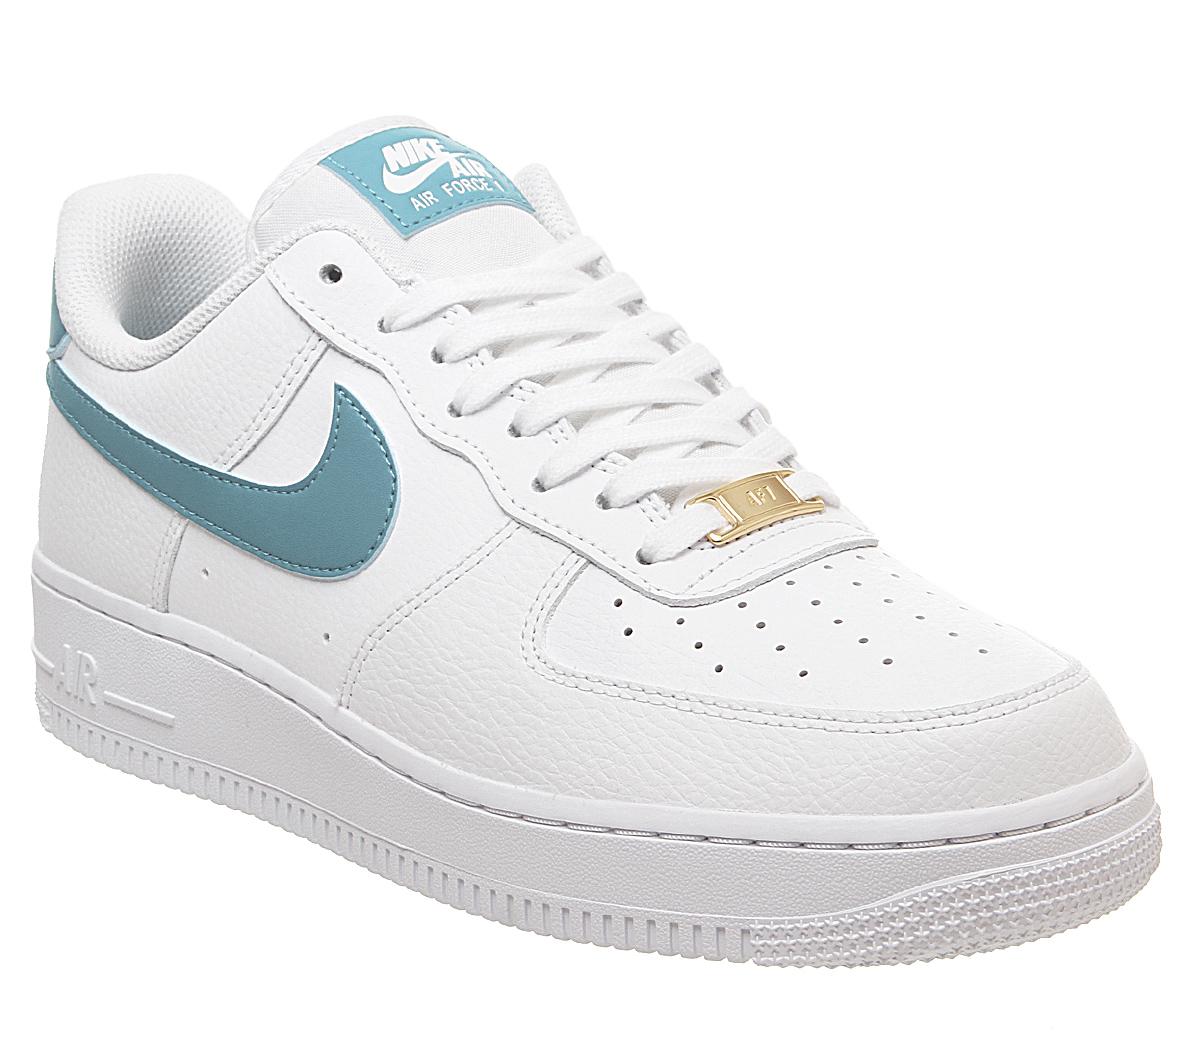 teal air forces